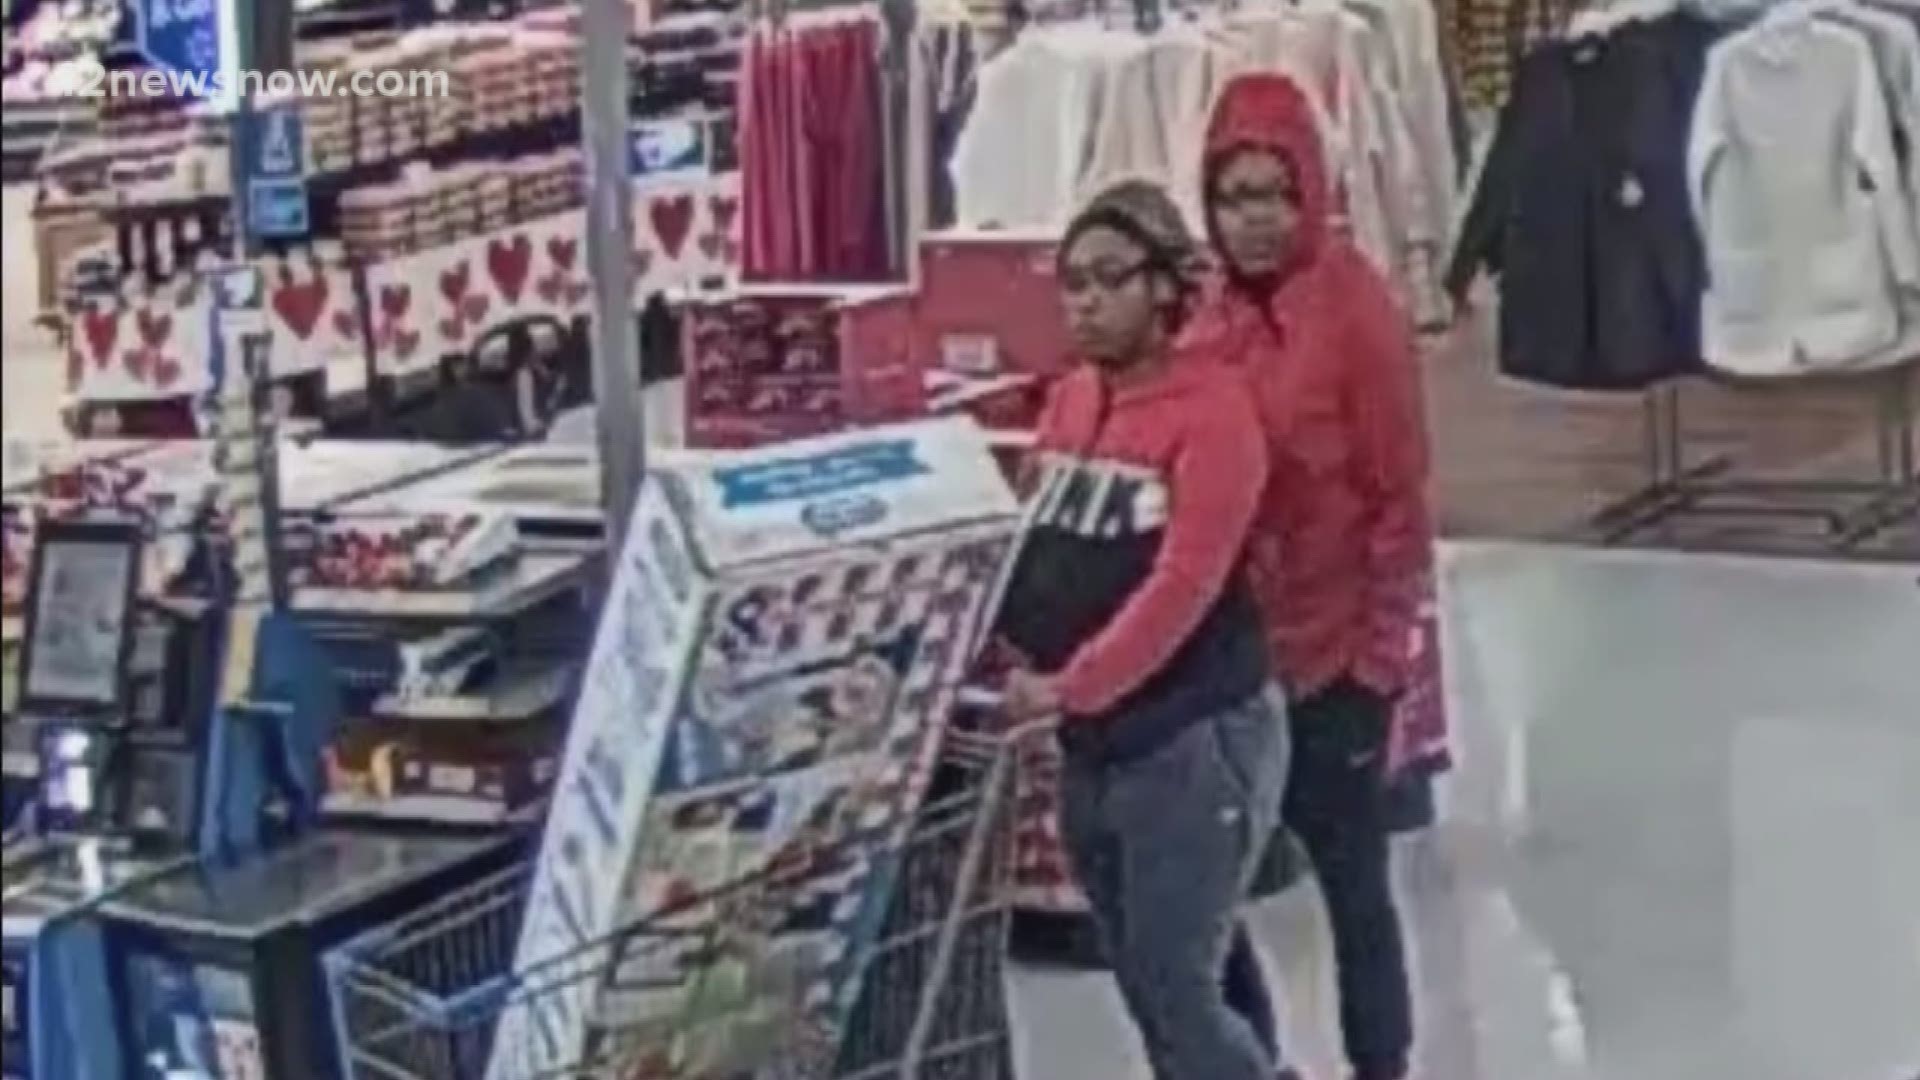 Investigators shared photos of the women. The two are accused of taking thousands of dollars in merchandise from Walmart.